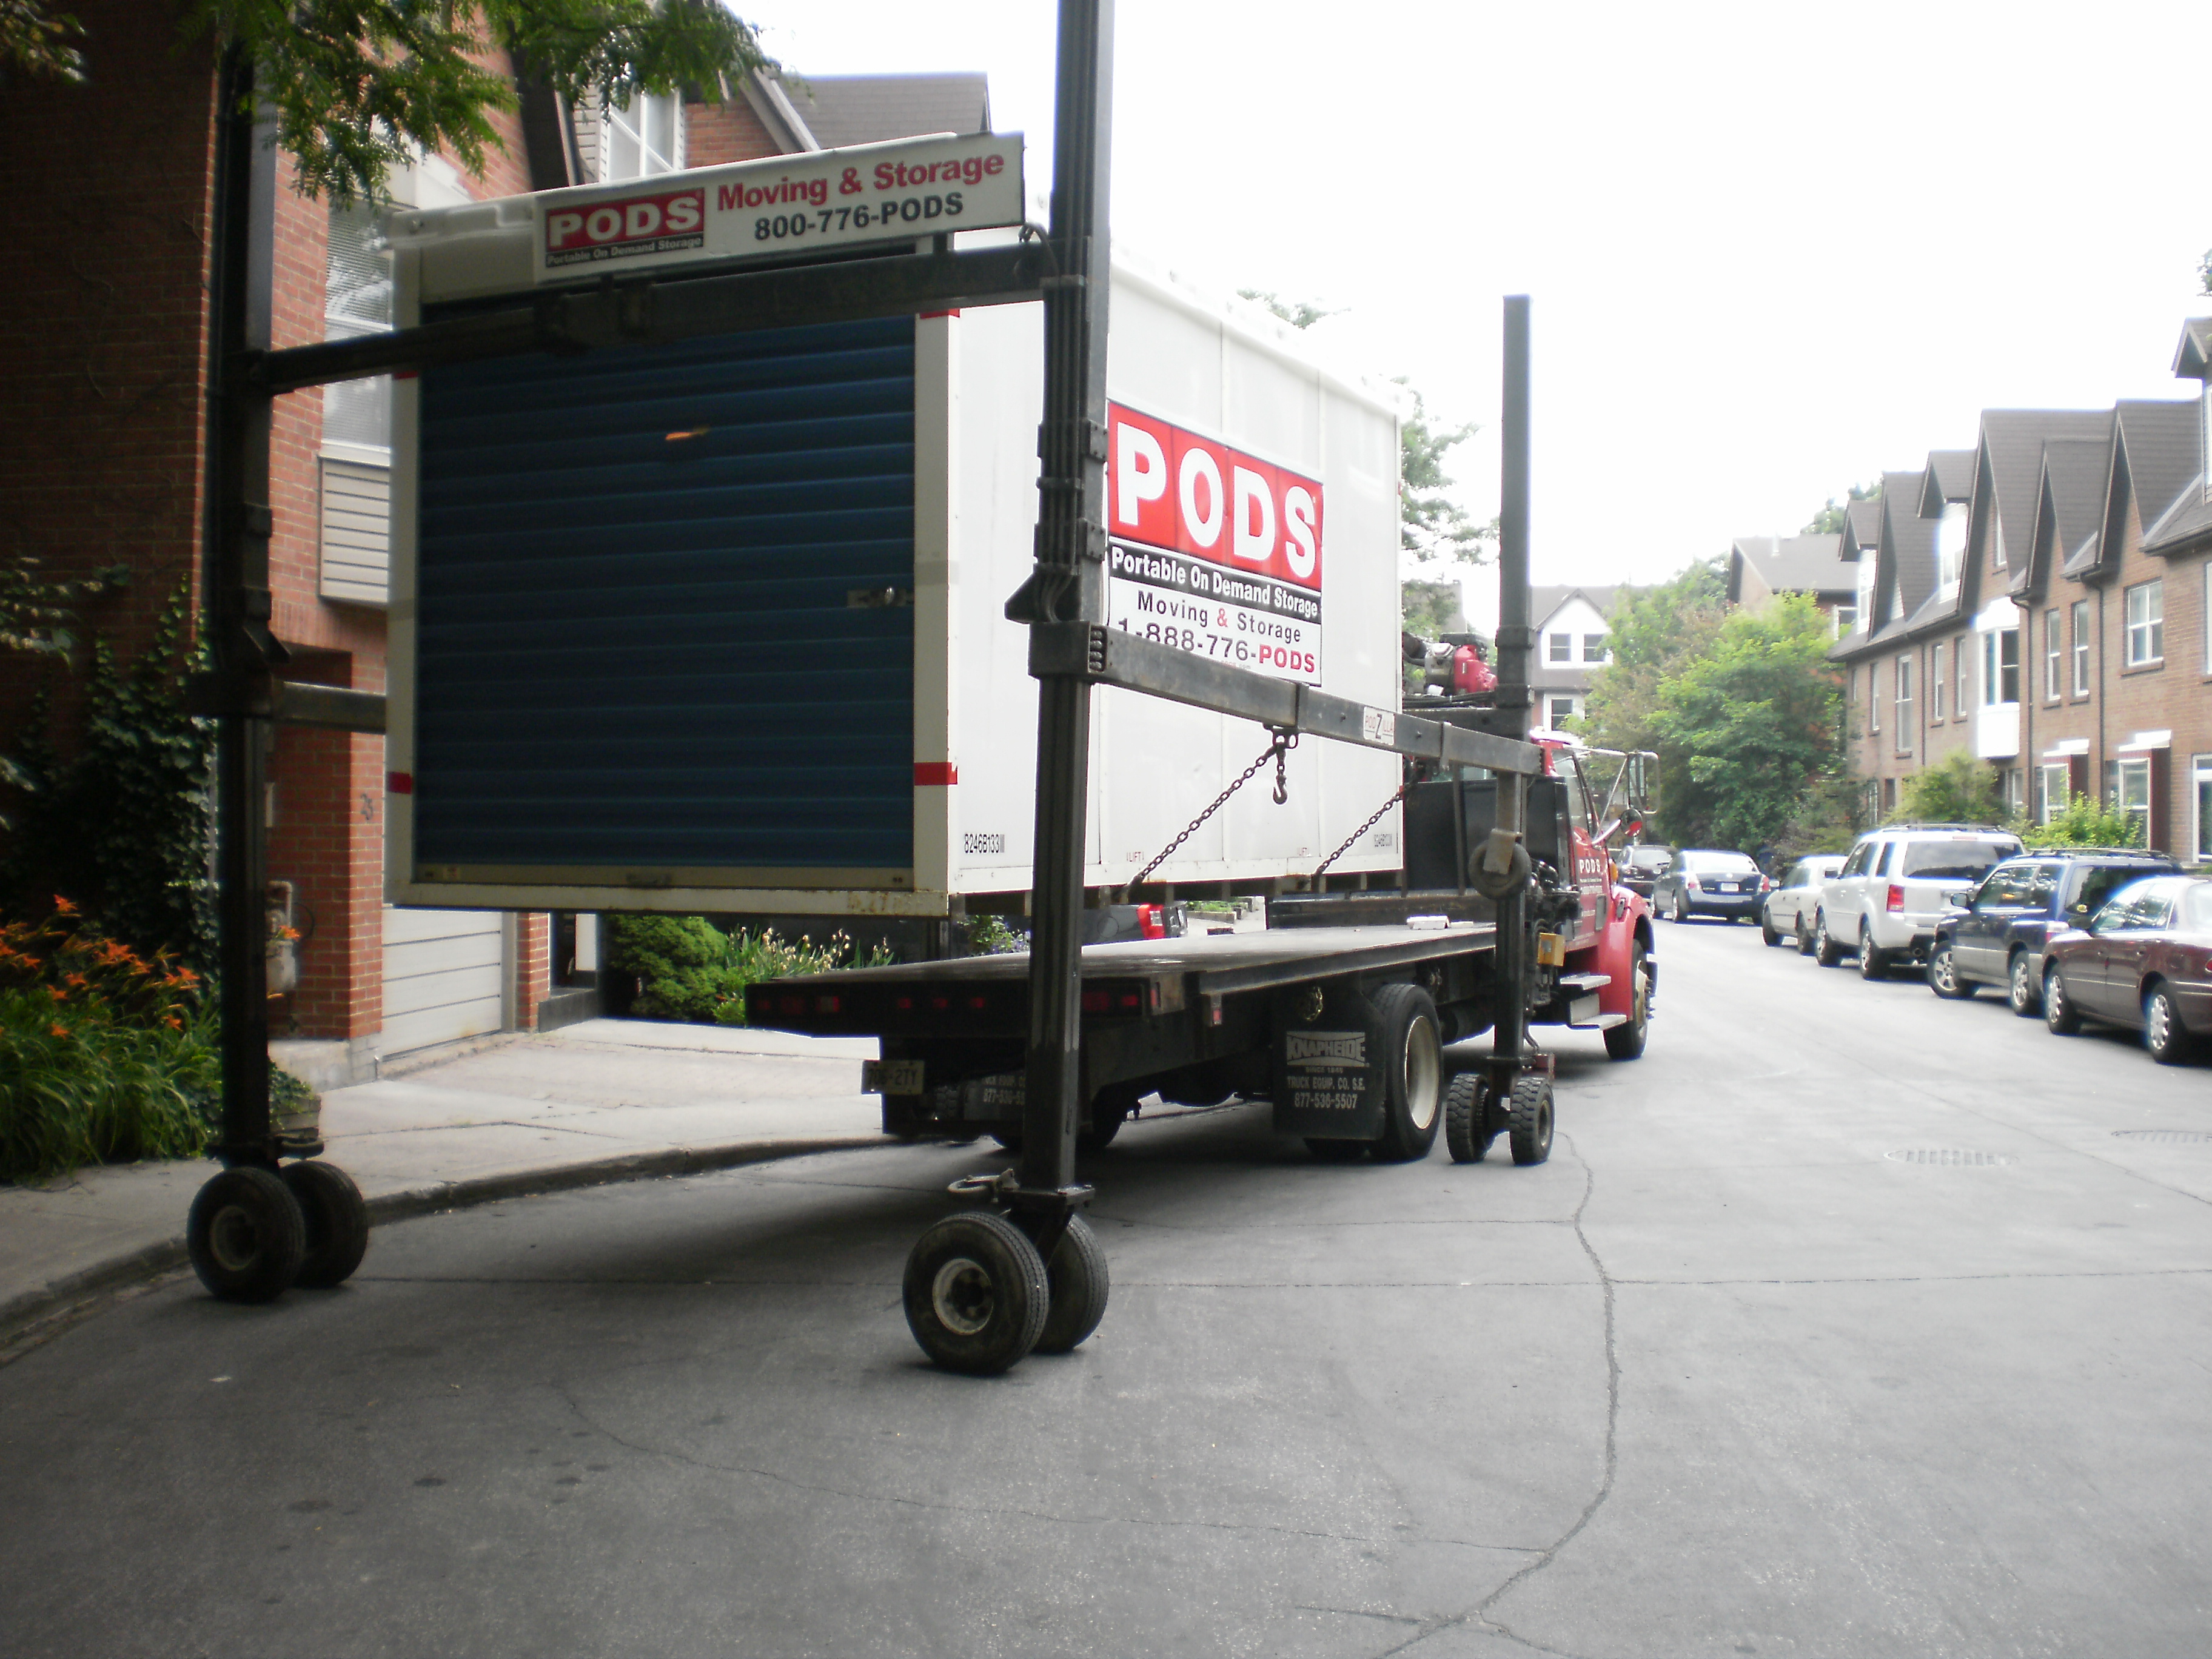 Unloading a shipping container with household contents -g photo